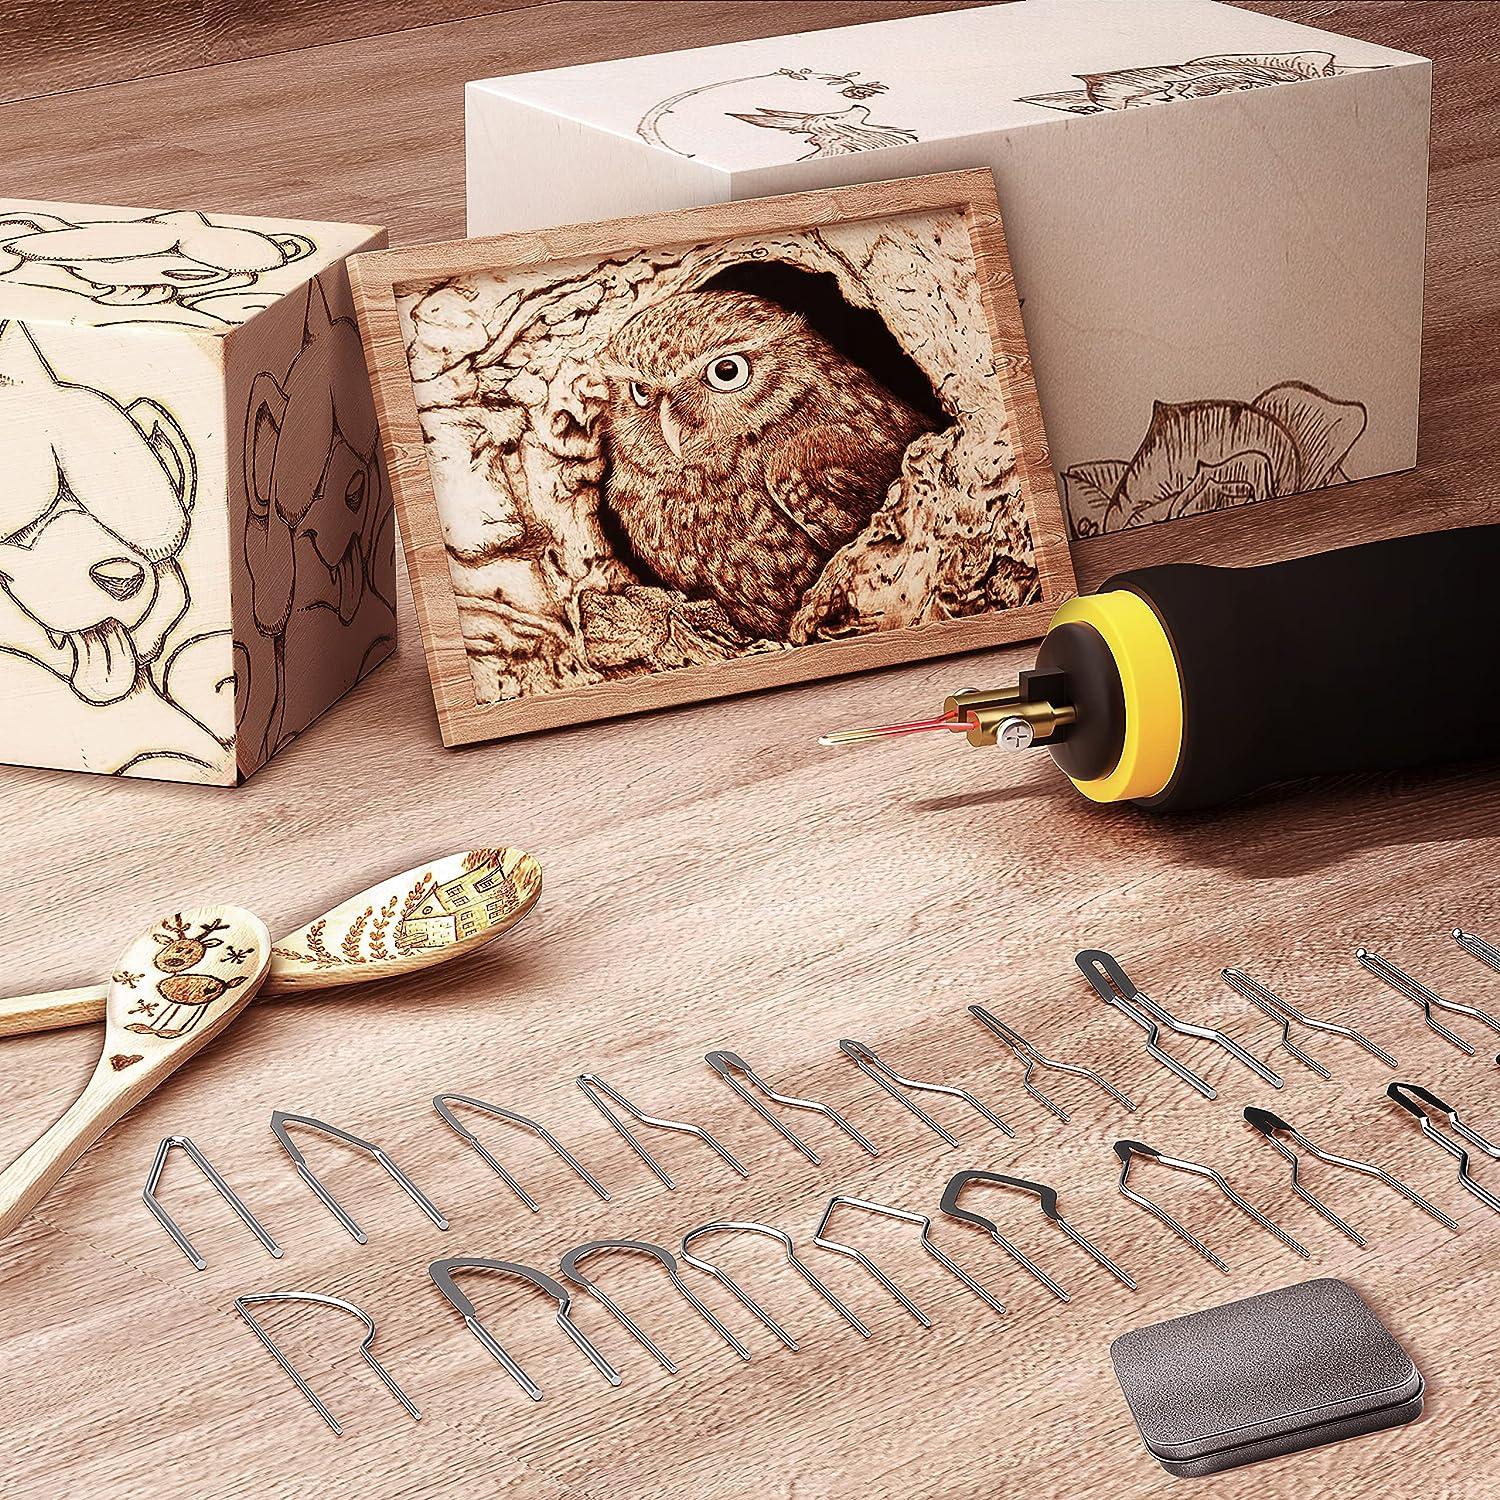 Professional Wood Burning Kit,Wood Burner for Wood Burning Tool Pyrography  Pen with 24 Wire Nibs Tips Including Ball Tips, Wood Burning Kit for adults  and kids Silver Gray wood burenr pen double